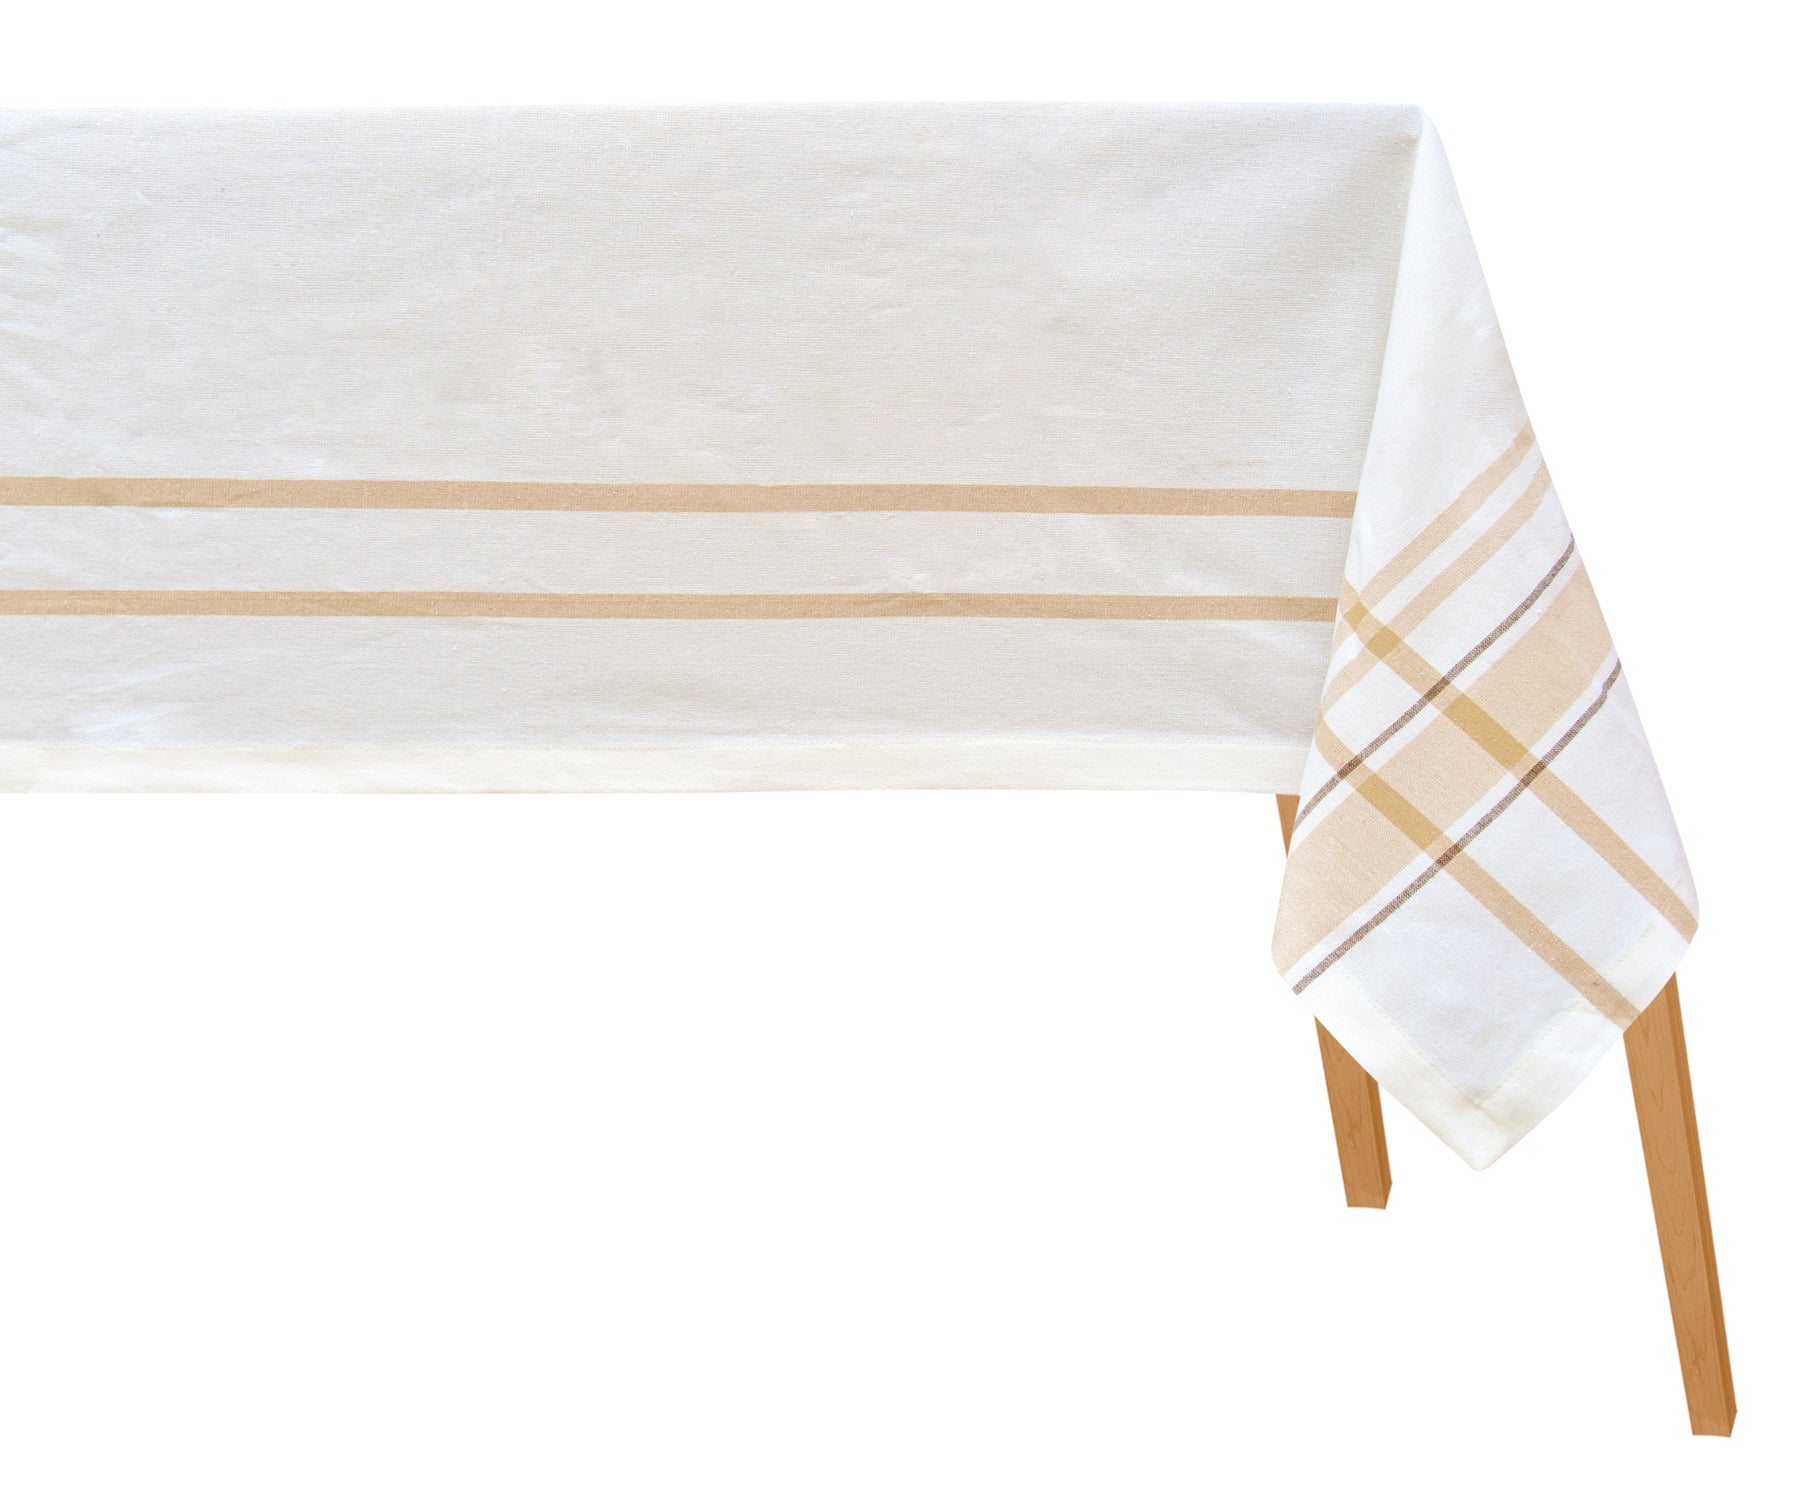 French tablecloth in white with a brown stripe detail